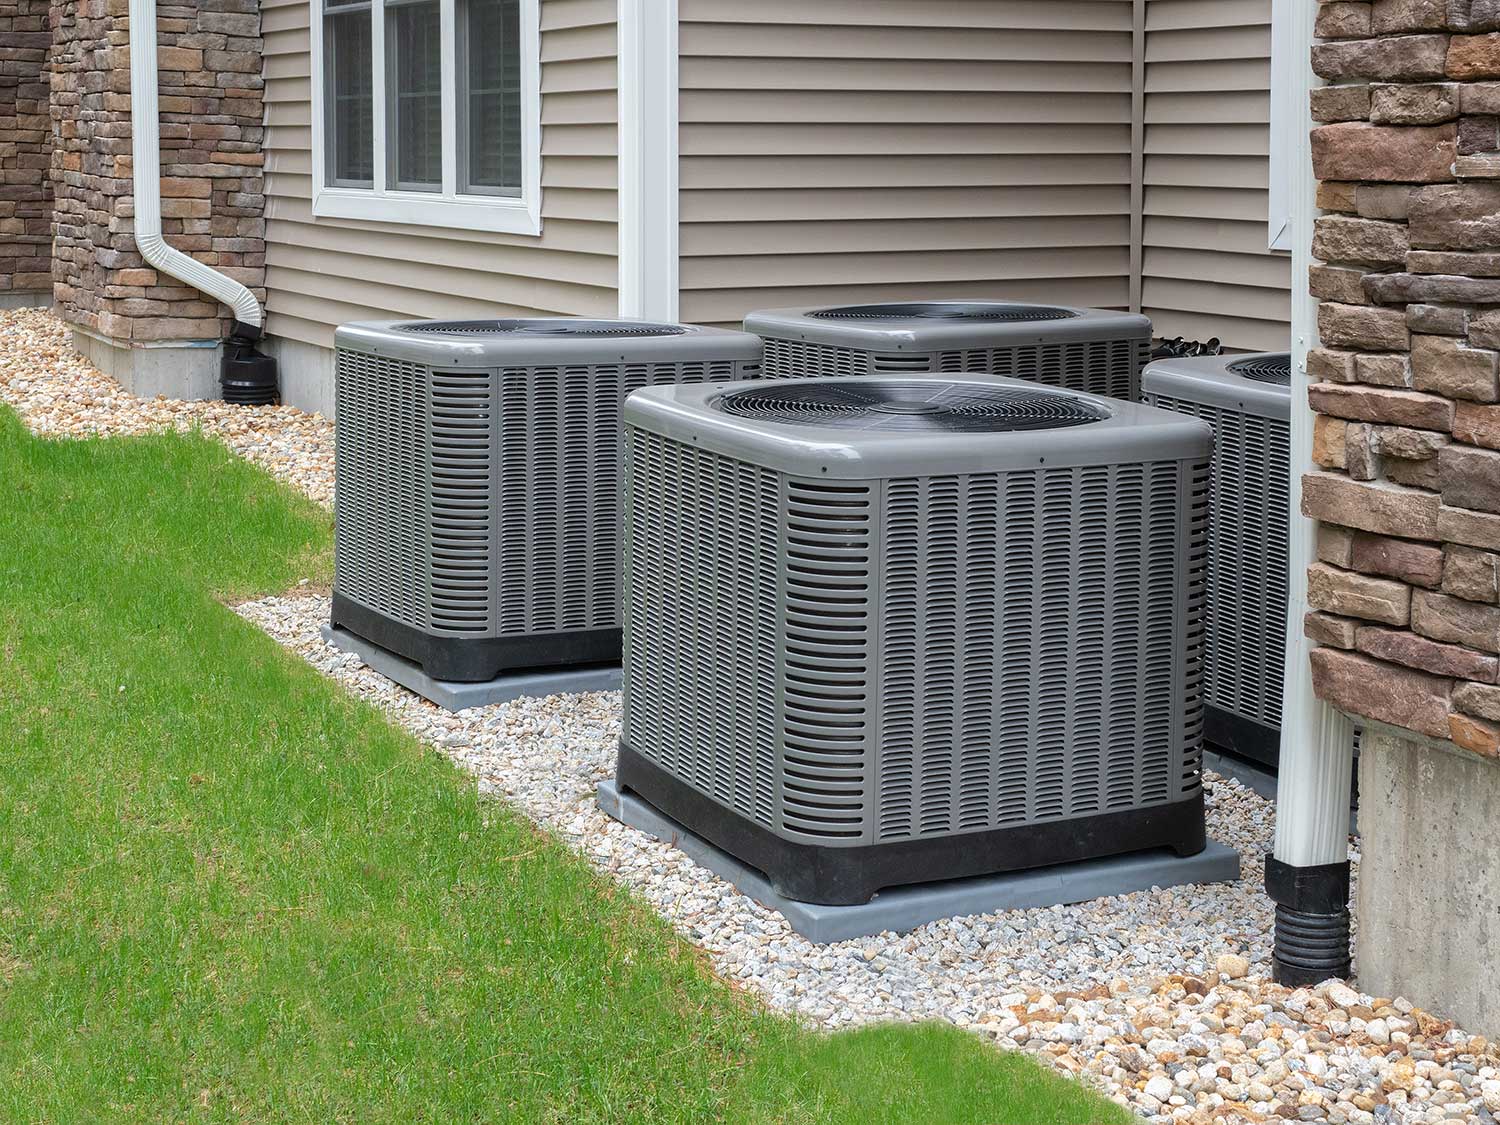 More about those smaller air conditioning system units